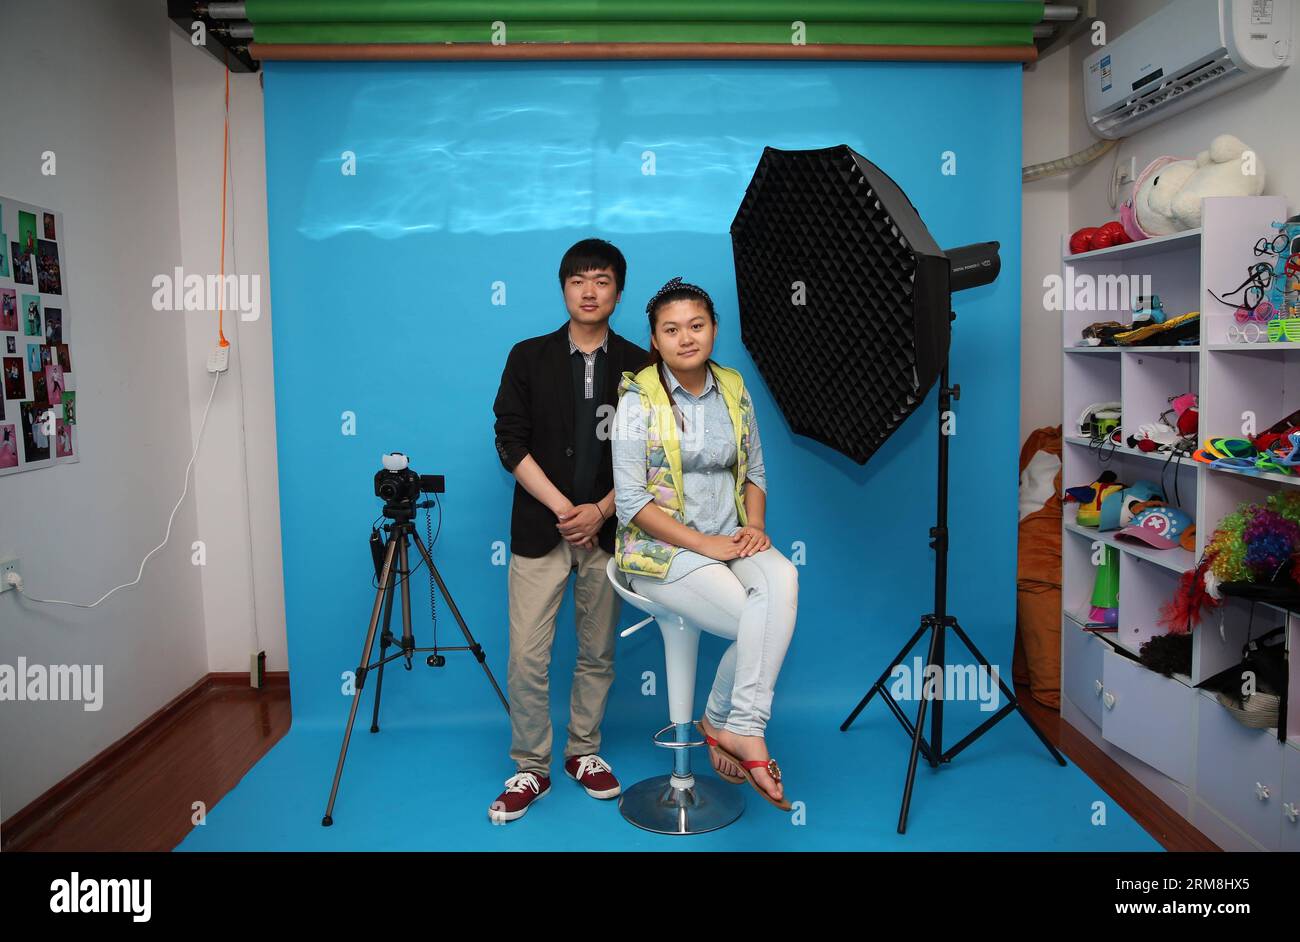 CHANGSHA, April 15, 2014 (Xinhua) -- Zeng Jun (L) and Yuan Chunzi pose for photos at their photo studio Takaphotoo in Changsha, capital of central China s Hunan Province, April 15, 2014. In March, Zeng Jun and his college classmate Yuan Chunzi opened up Takaphotoo, a self-service photo studio in which customers are allowed to shoot pictures for themselves. In a photo booth where the camera and lighting are already set, what customers need to do is to pose in front of the lens and press the remote shutter. The two young entrepreneurs believe this will make their customers feel more relaxed and Stock Photo